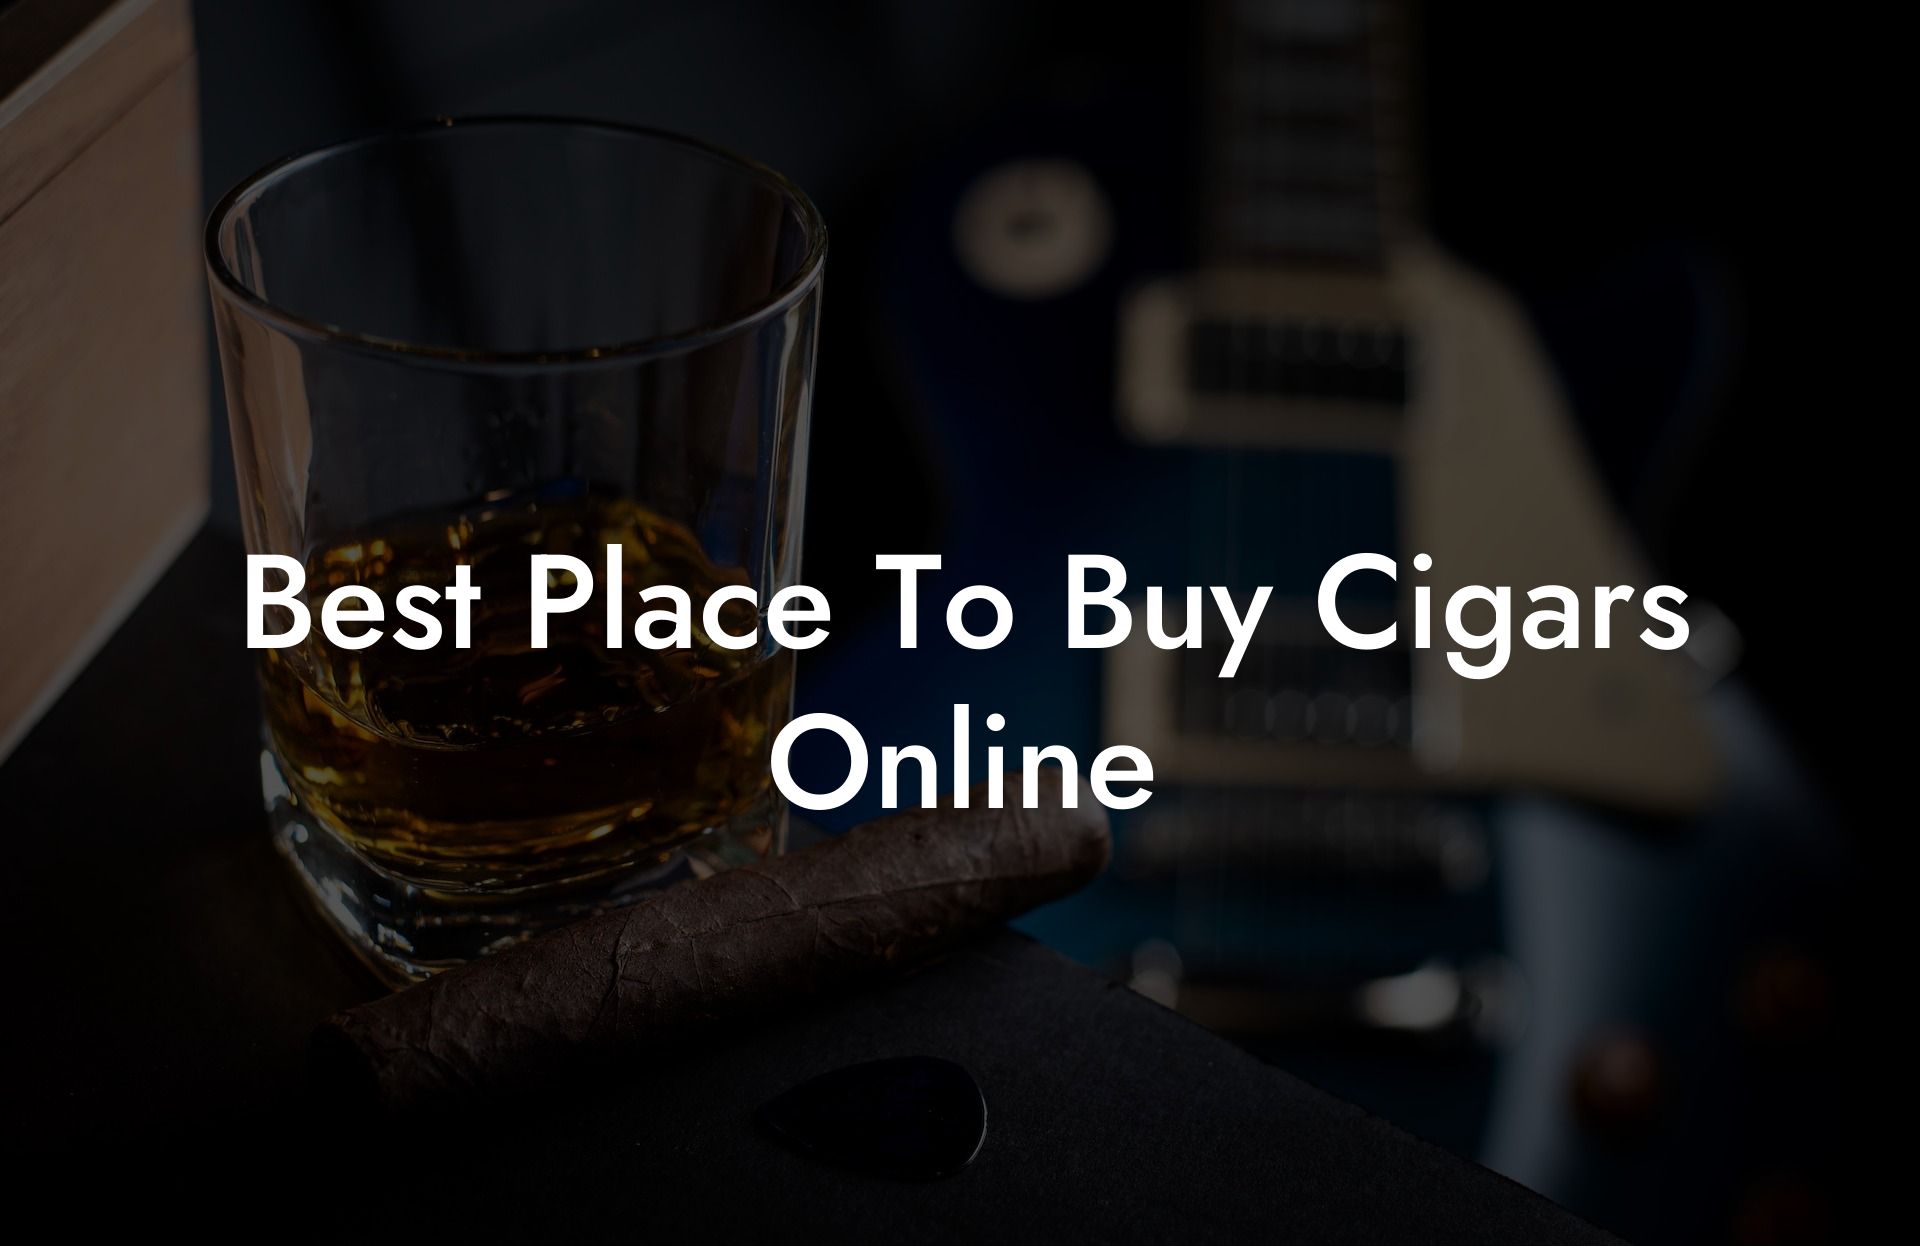 Best Place To Buy Cigars Online